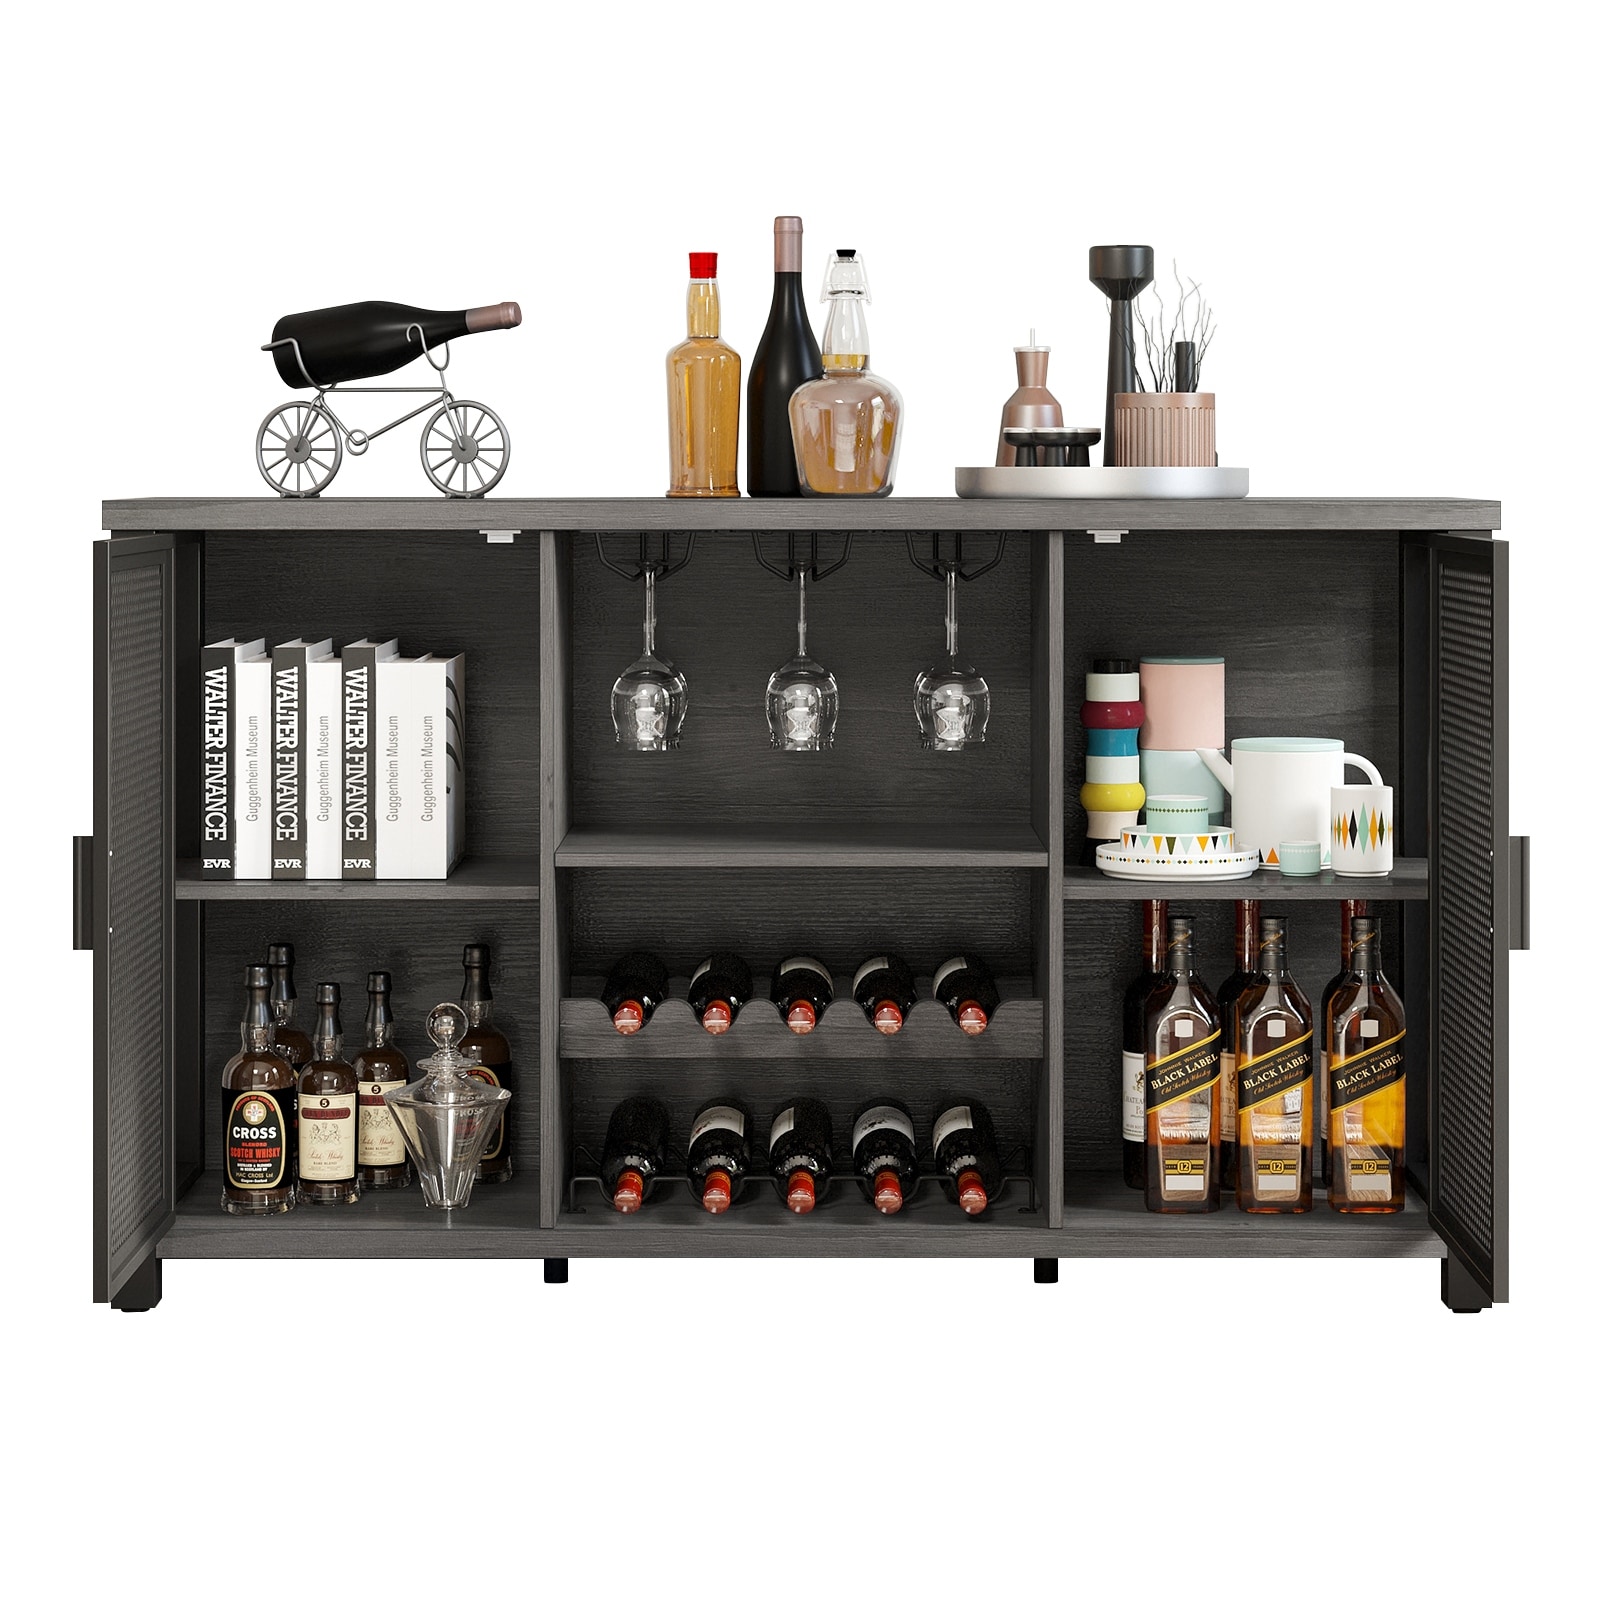 https://ak1.ostkcdn.com/images/products/is/images/direct/7635ba687b051f6e2c970b9701220733c3d43619/Industrial-Bar-Cabinet-for-Liquor-and-Glasses-Coffee-Bar-Cabinet-with-Wine-Racks-Mesh-Door-Glass-Holders.jpg